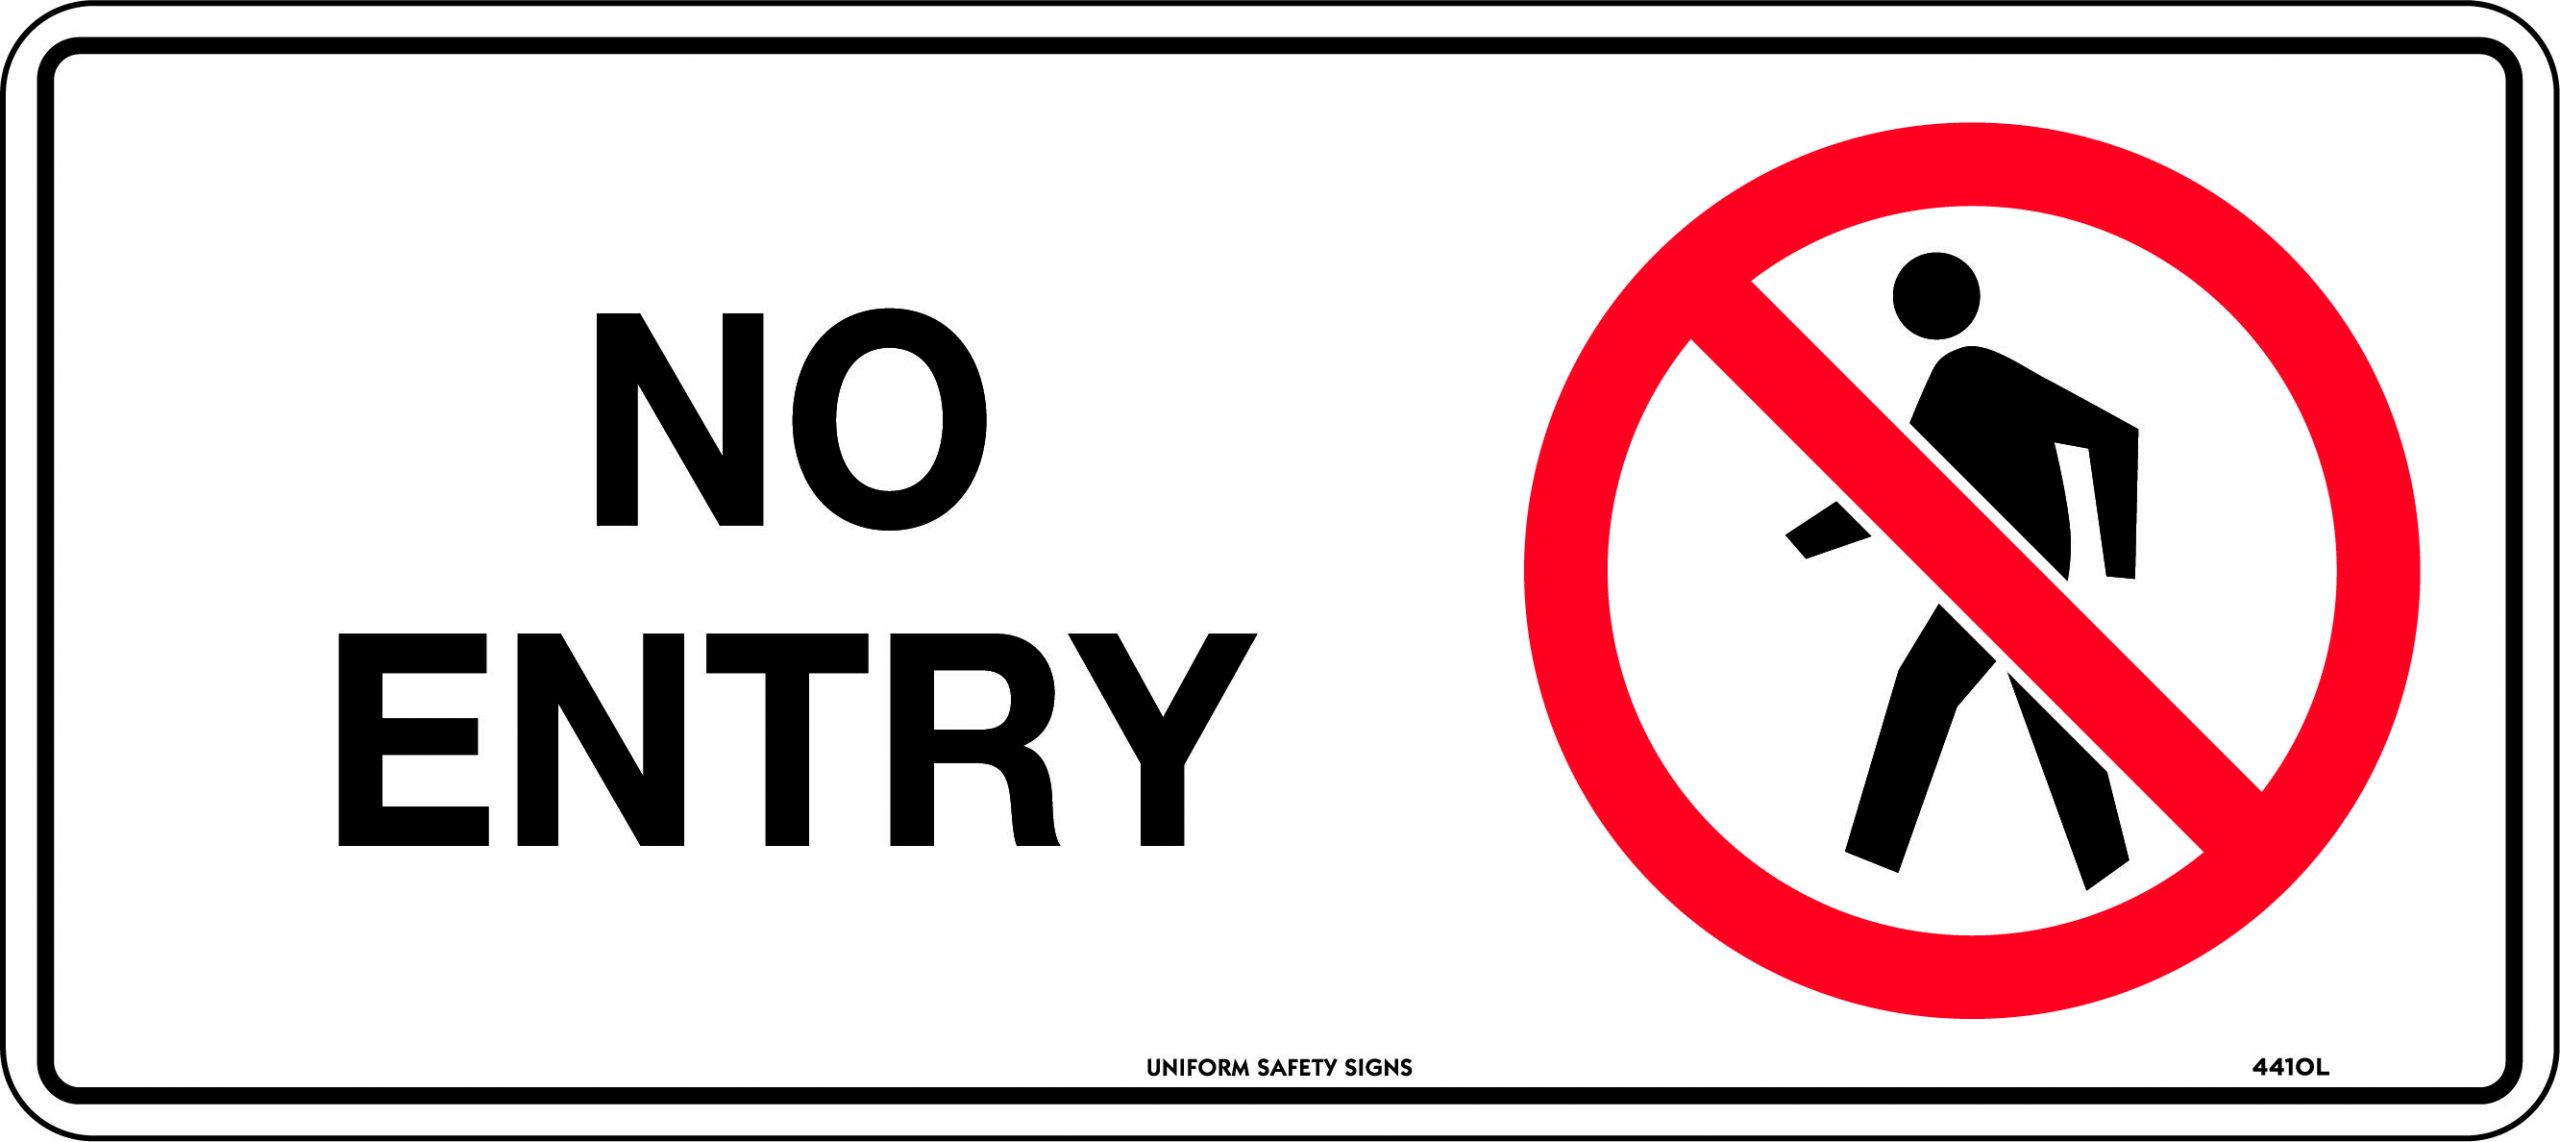 The product is not permitted. No enter. No entry. No entry logo. Entry sign.